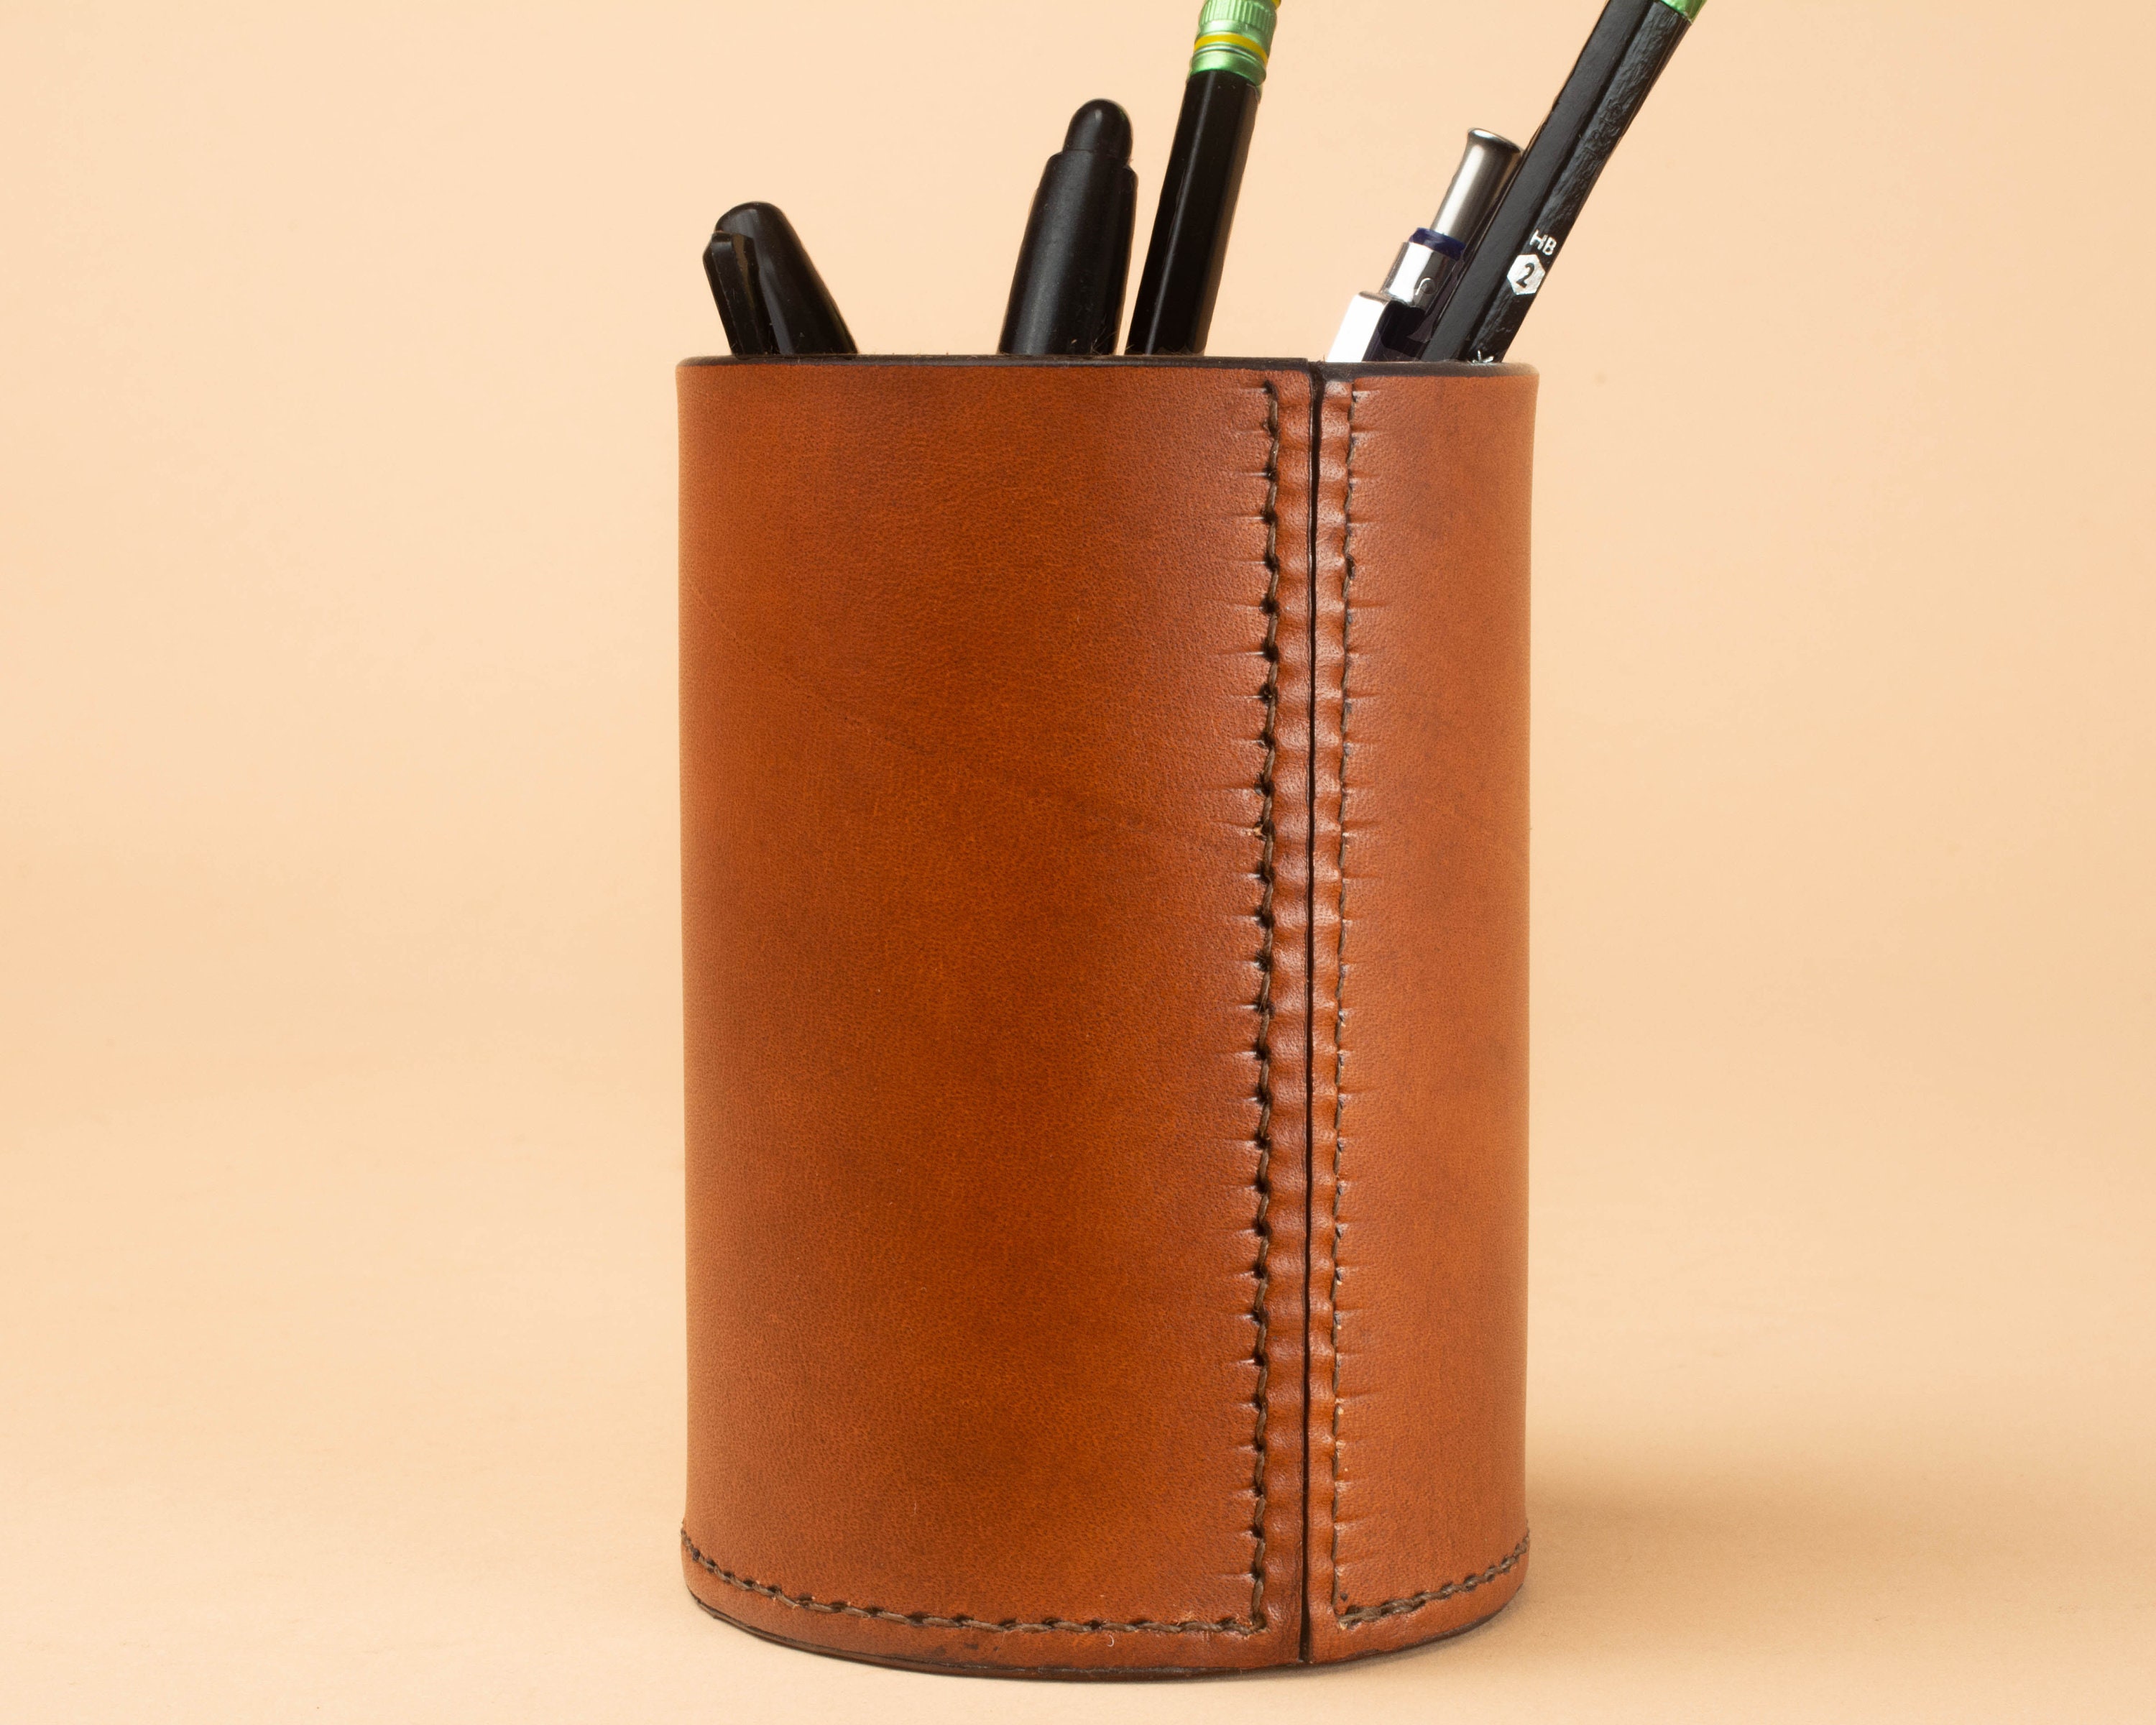 Round Pencil Cup - Hand Stitched Leather